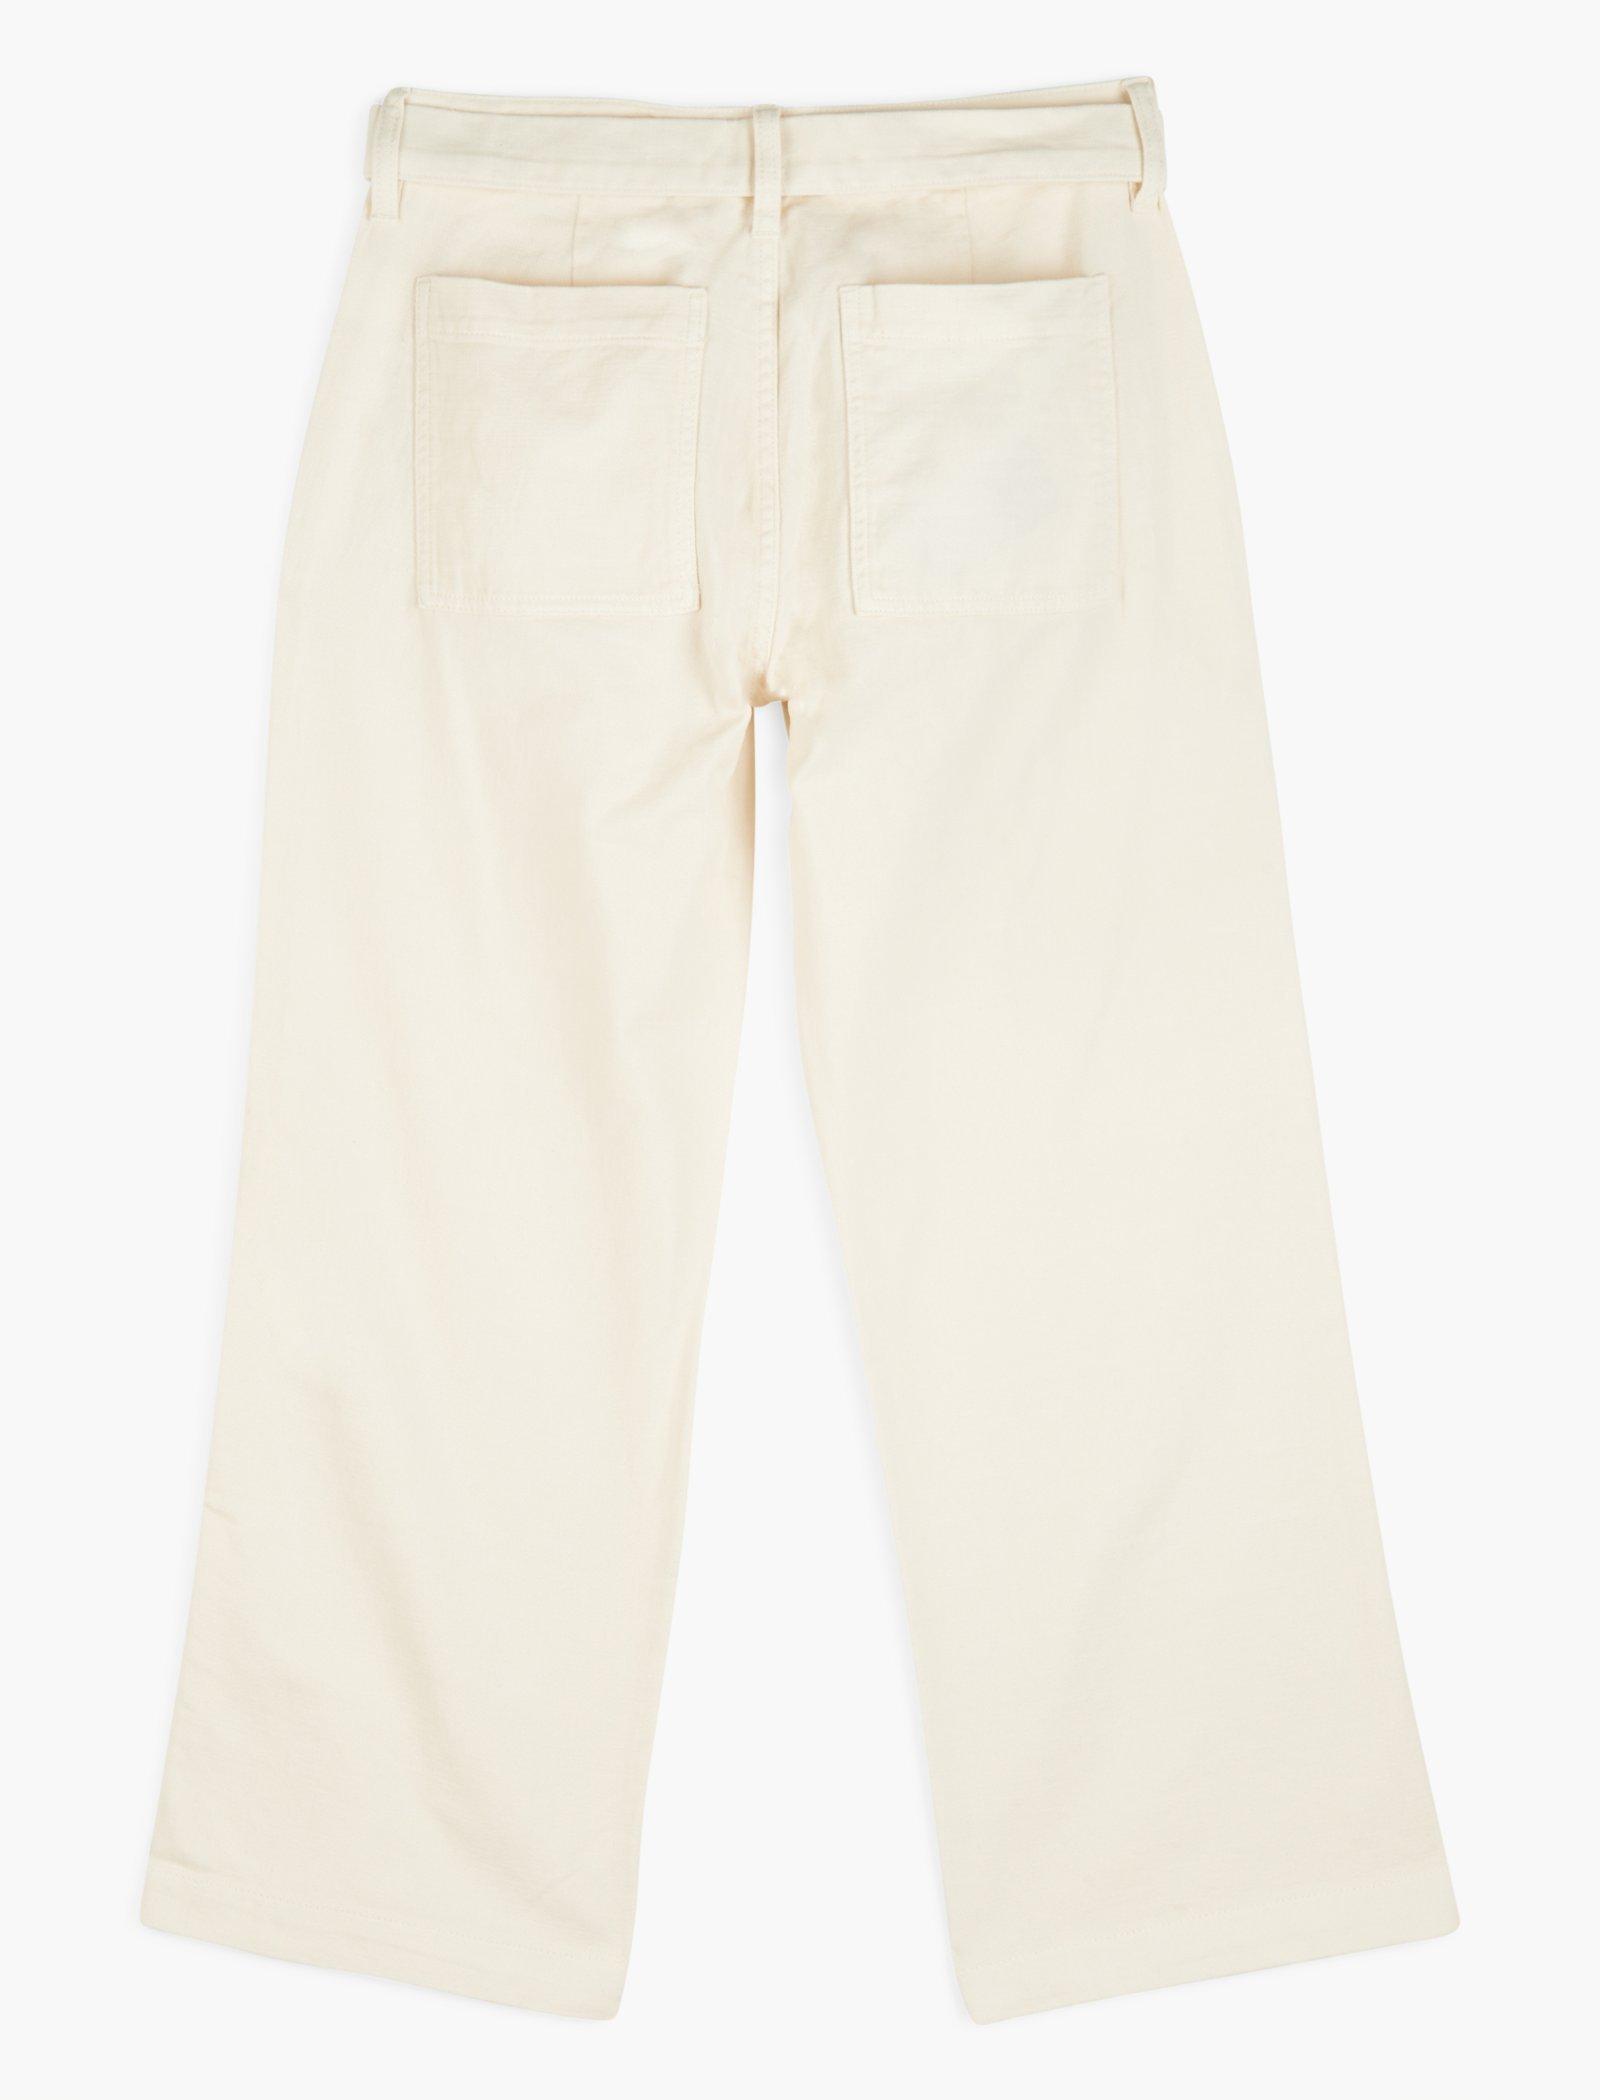 Women's Pants: Cords, Linen, & Chinos | Lucky Brand